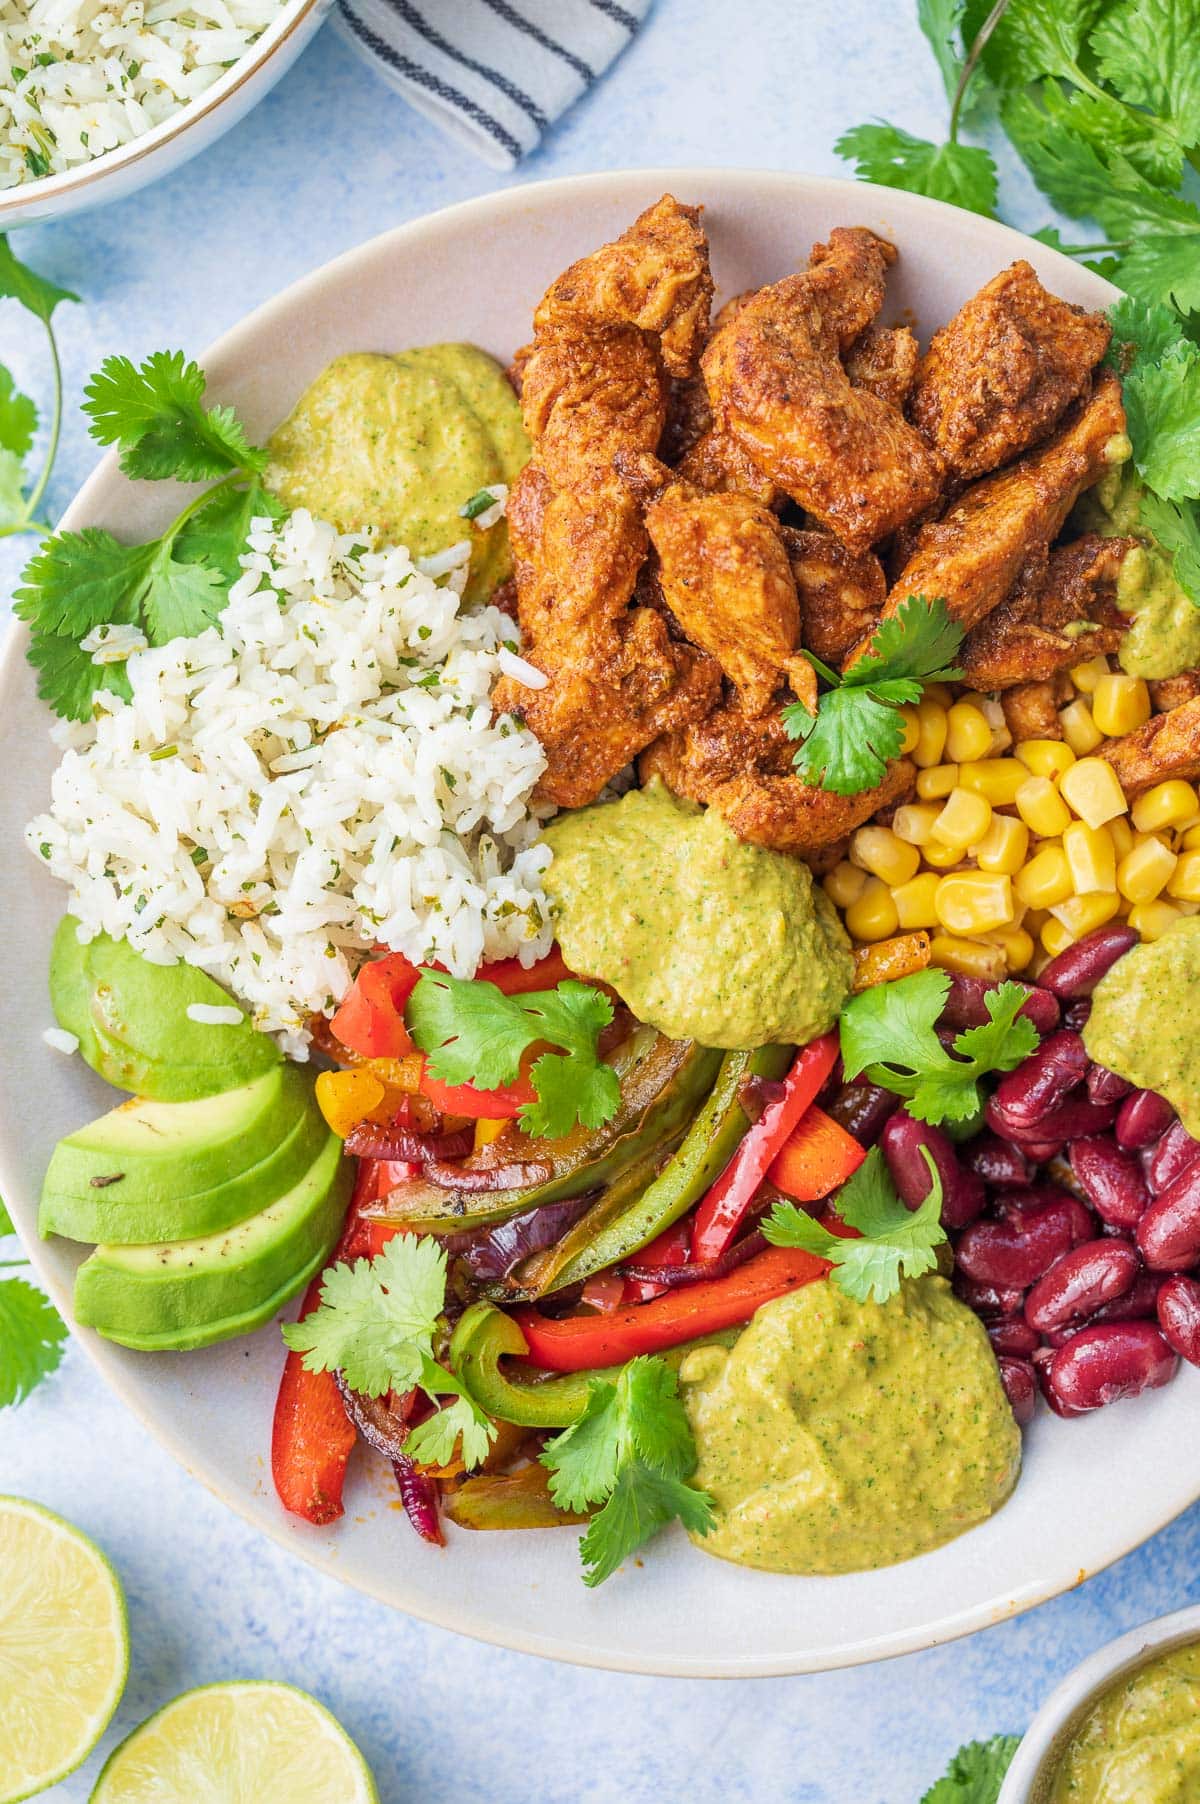 Chicken fajitas with corn, avocado, beans, cilantro lime rice, and sauce in a beige bowl.